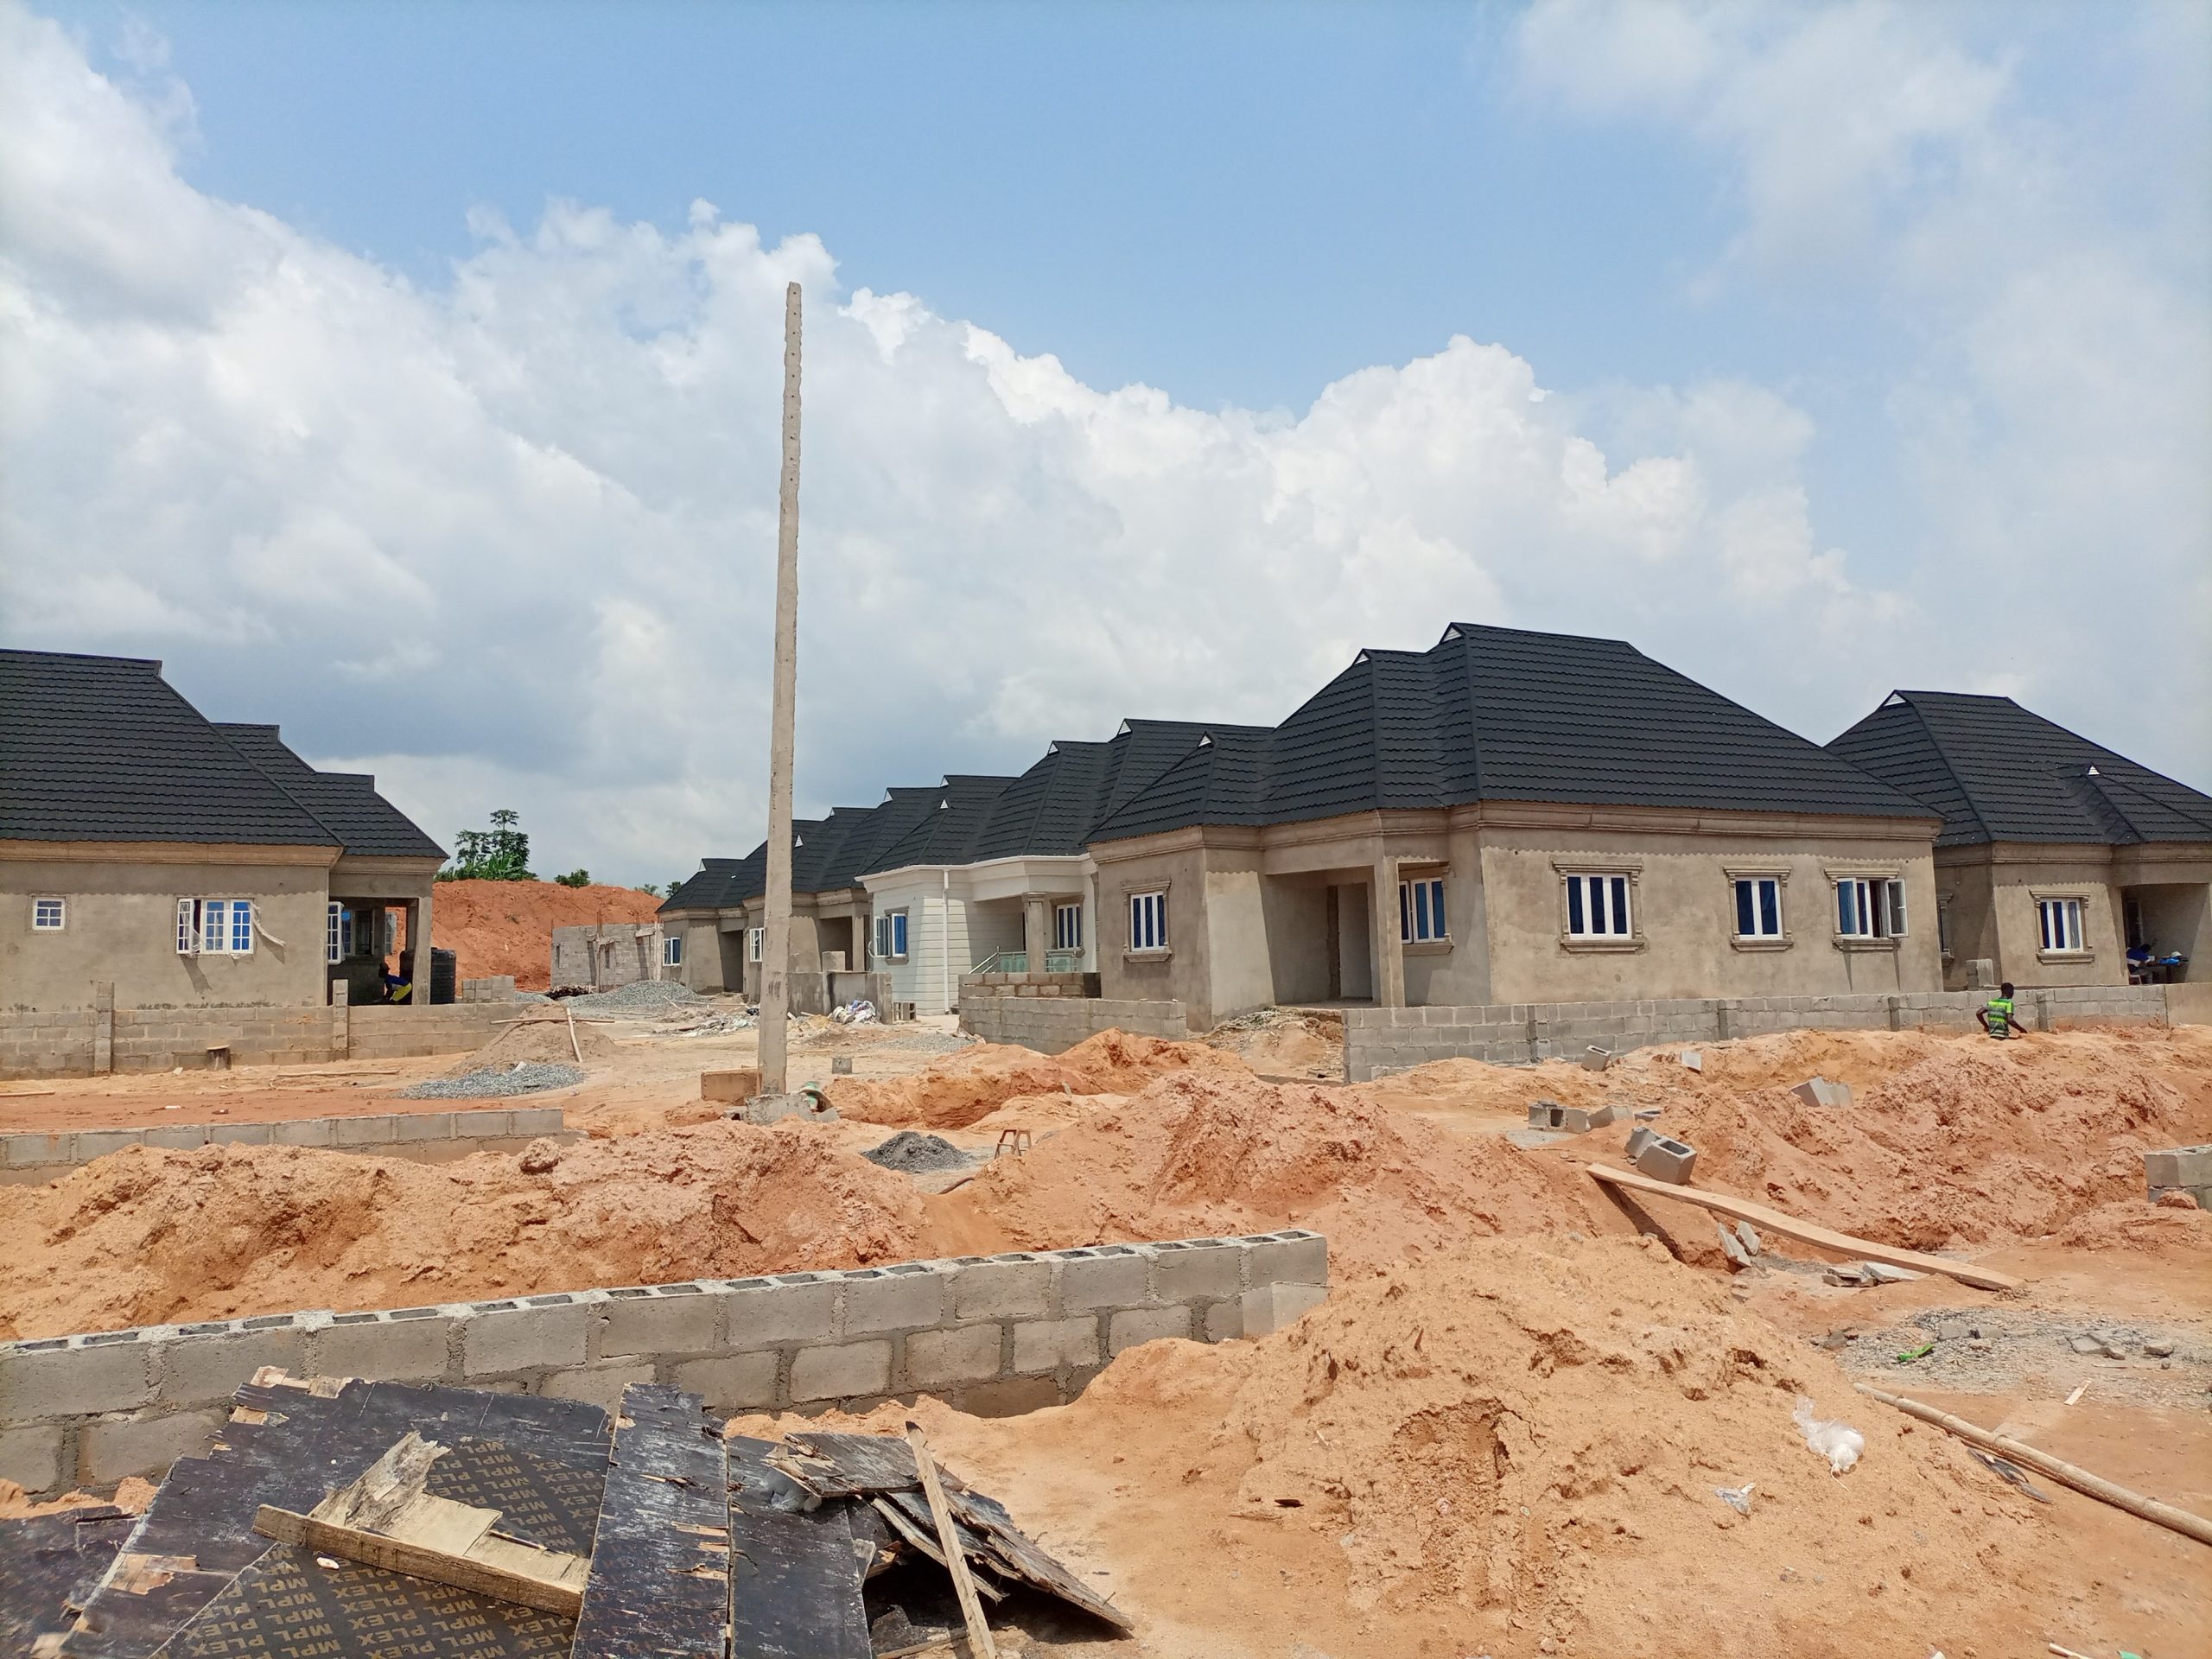 3 bedroom Bungalow For Sale at Treasure Hilltop, Lagos Mainland with monthly installment